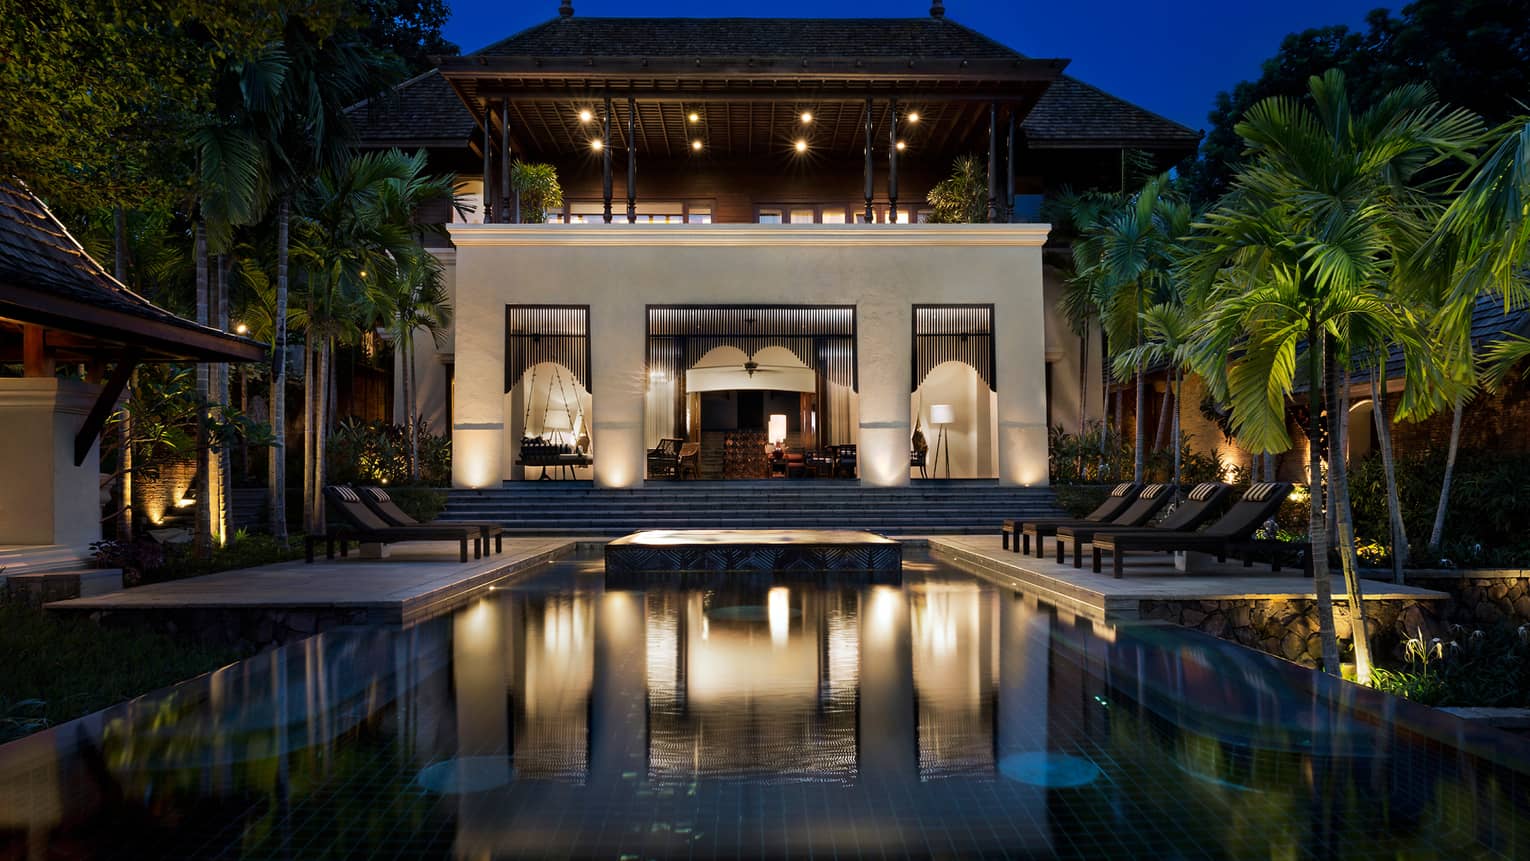 Large Four-Bedroom Residence Villa at night with lights, outdoor pool and palms 